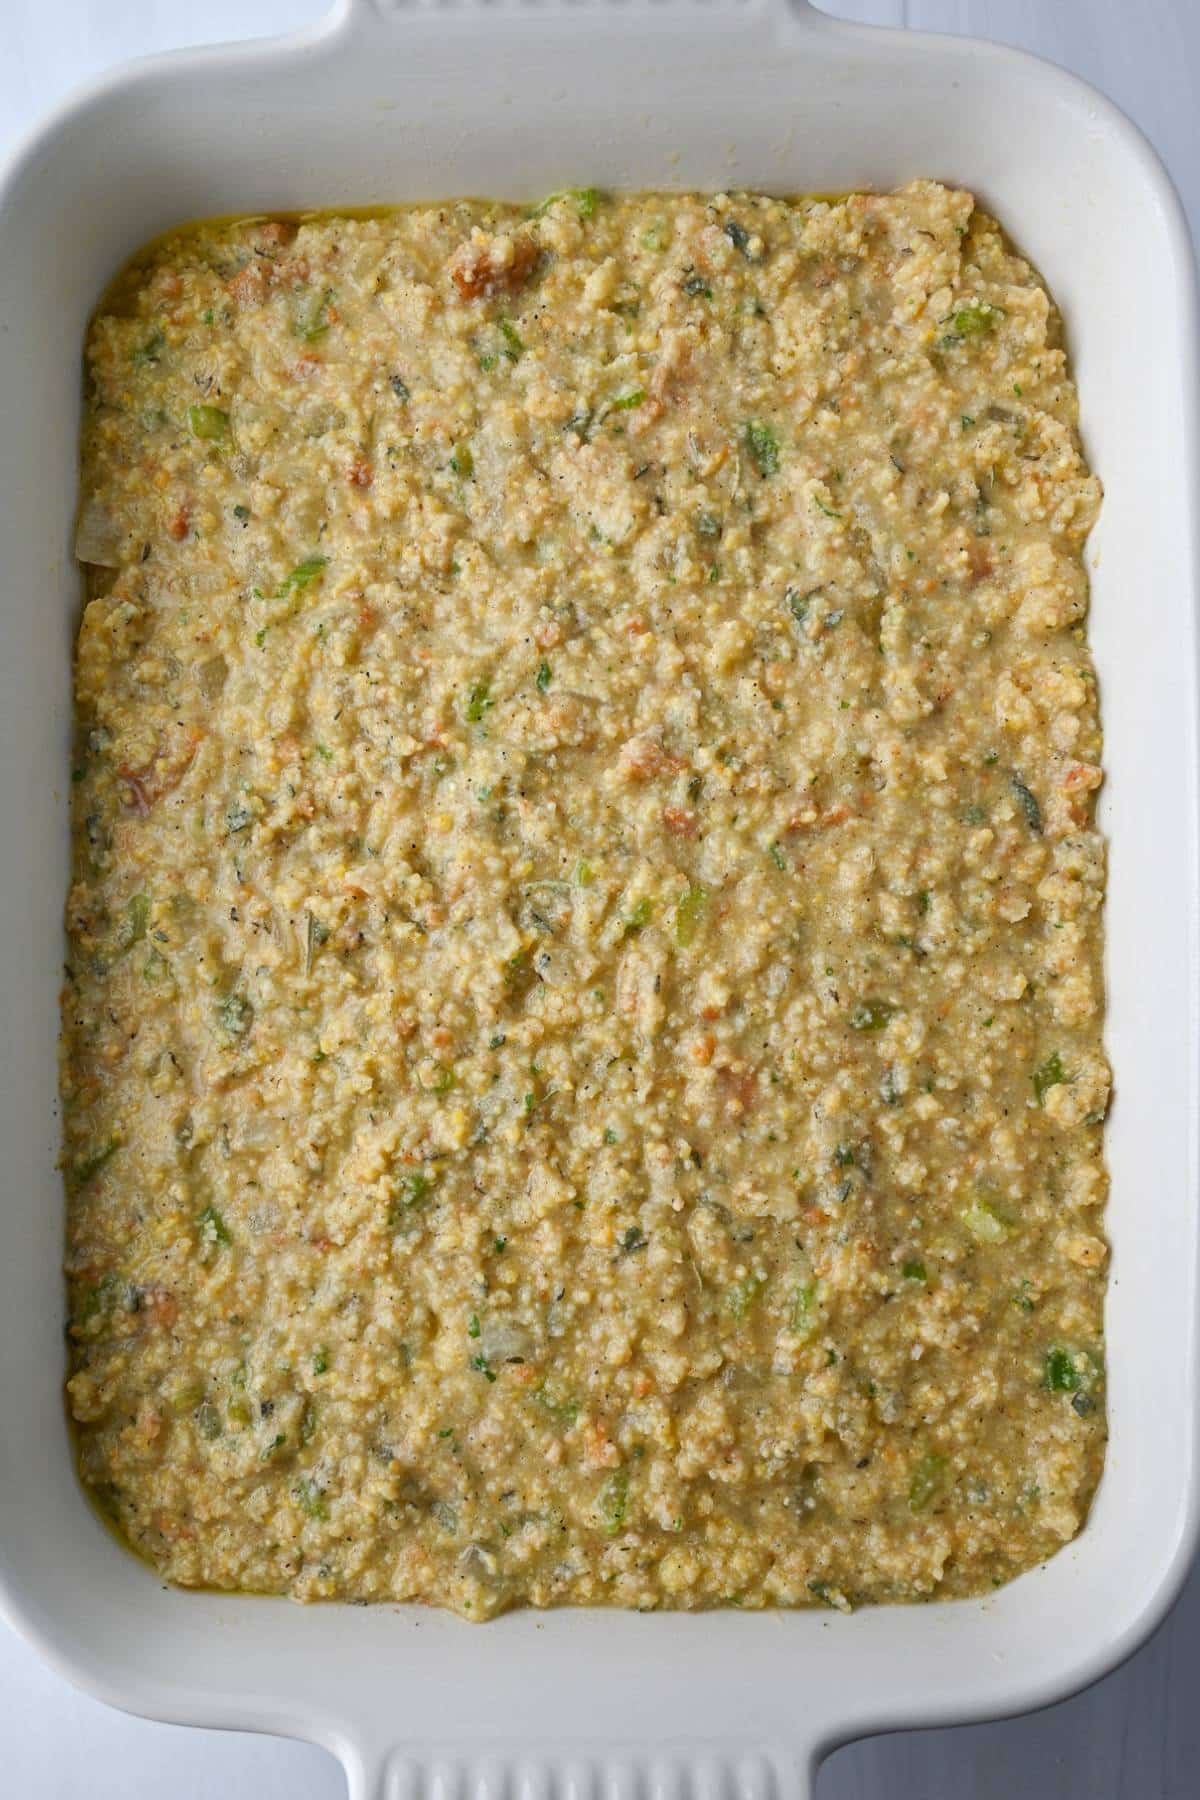 Gluten free dressing in a 9x13 ready to bake